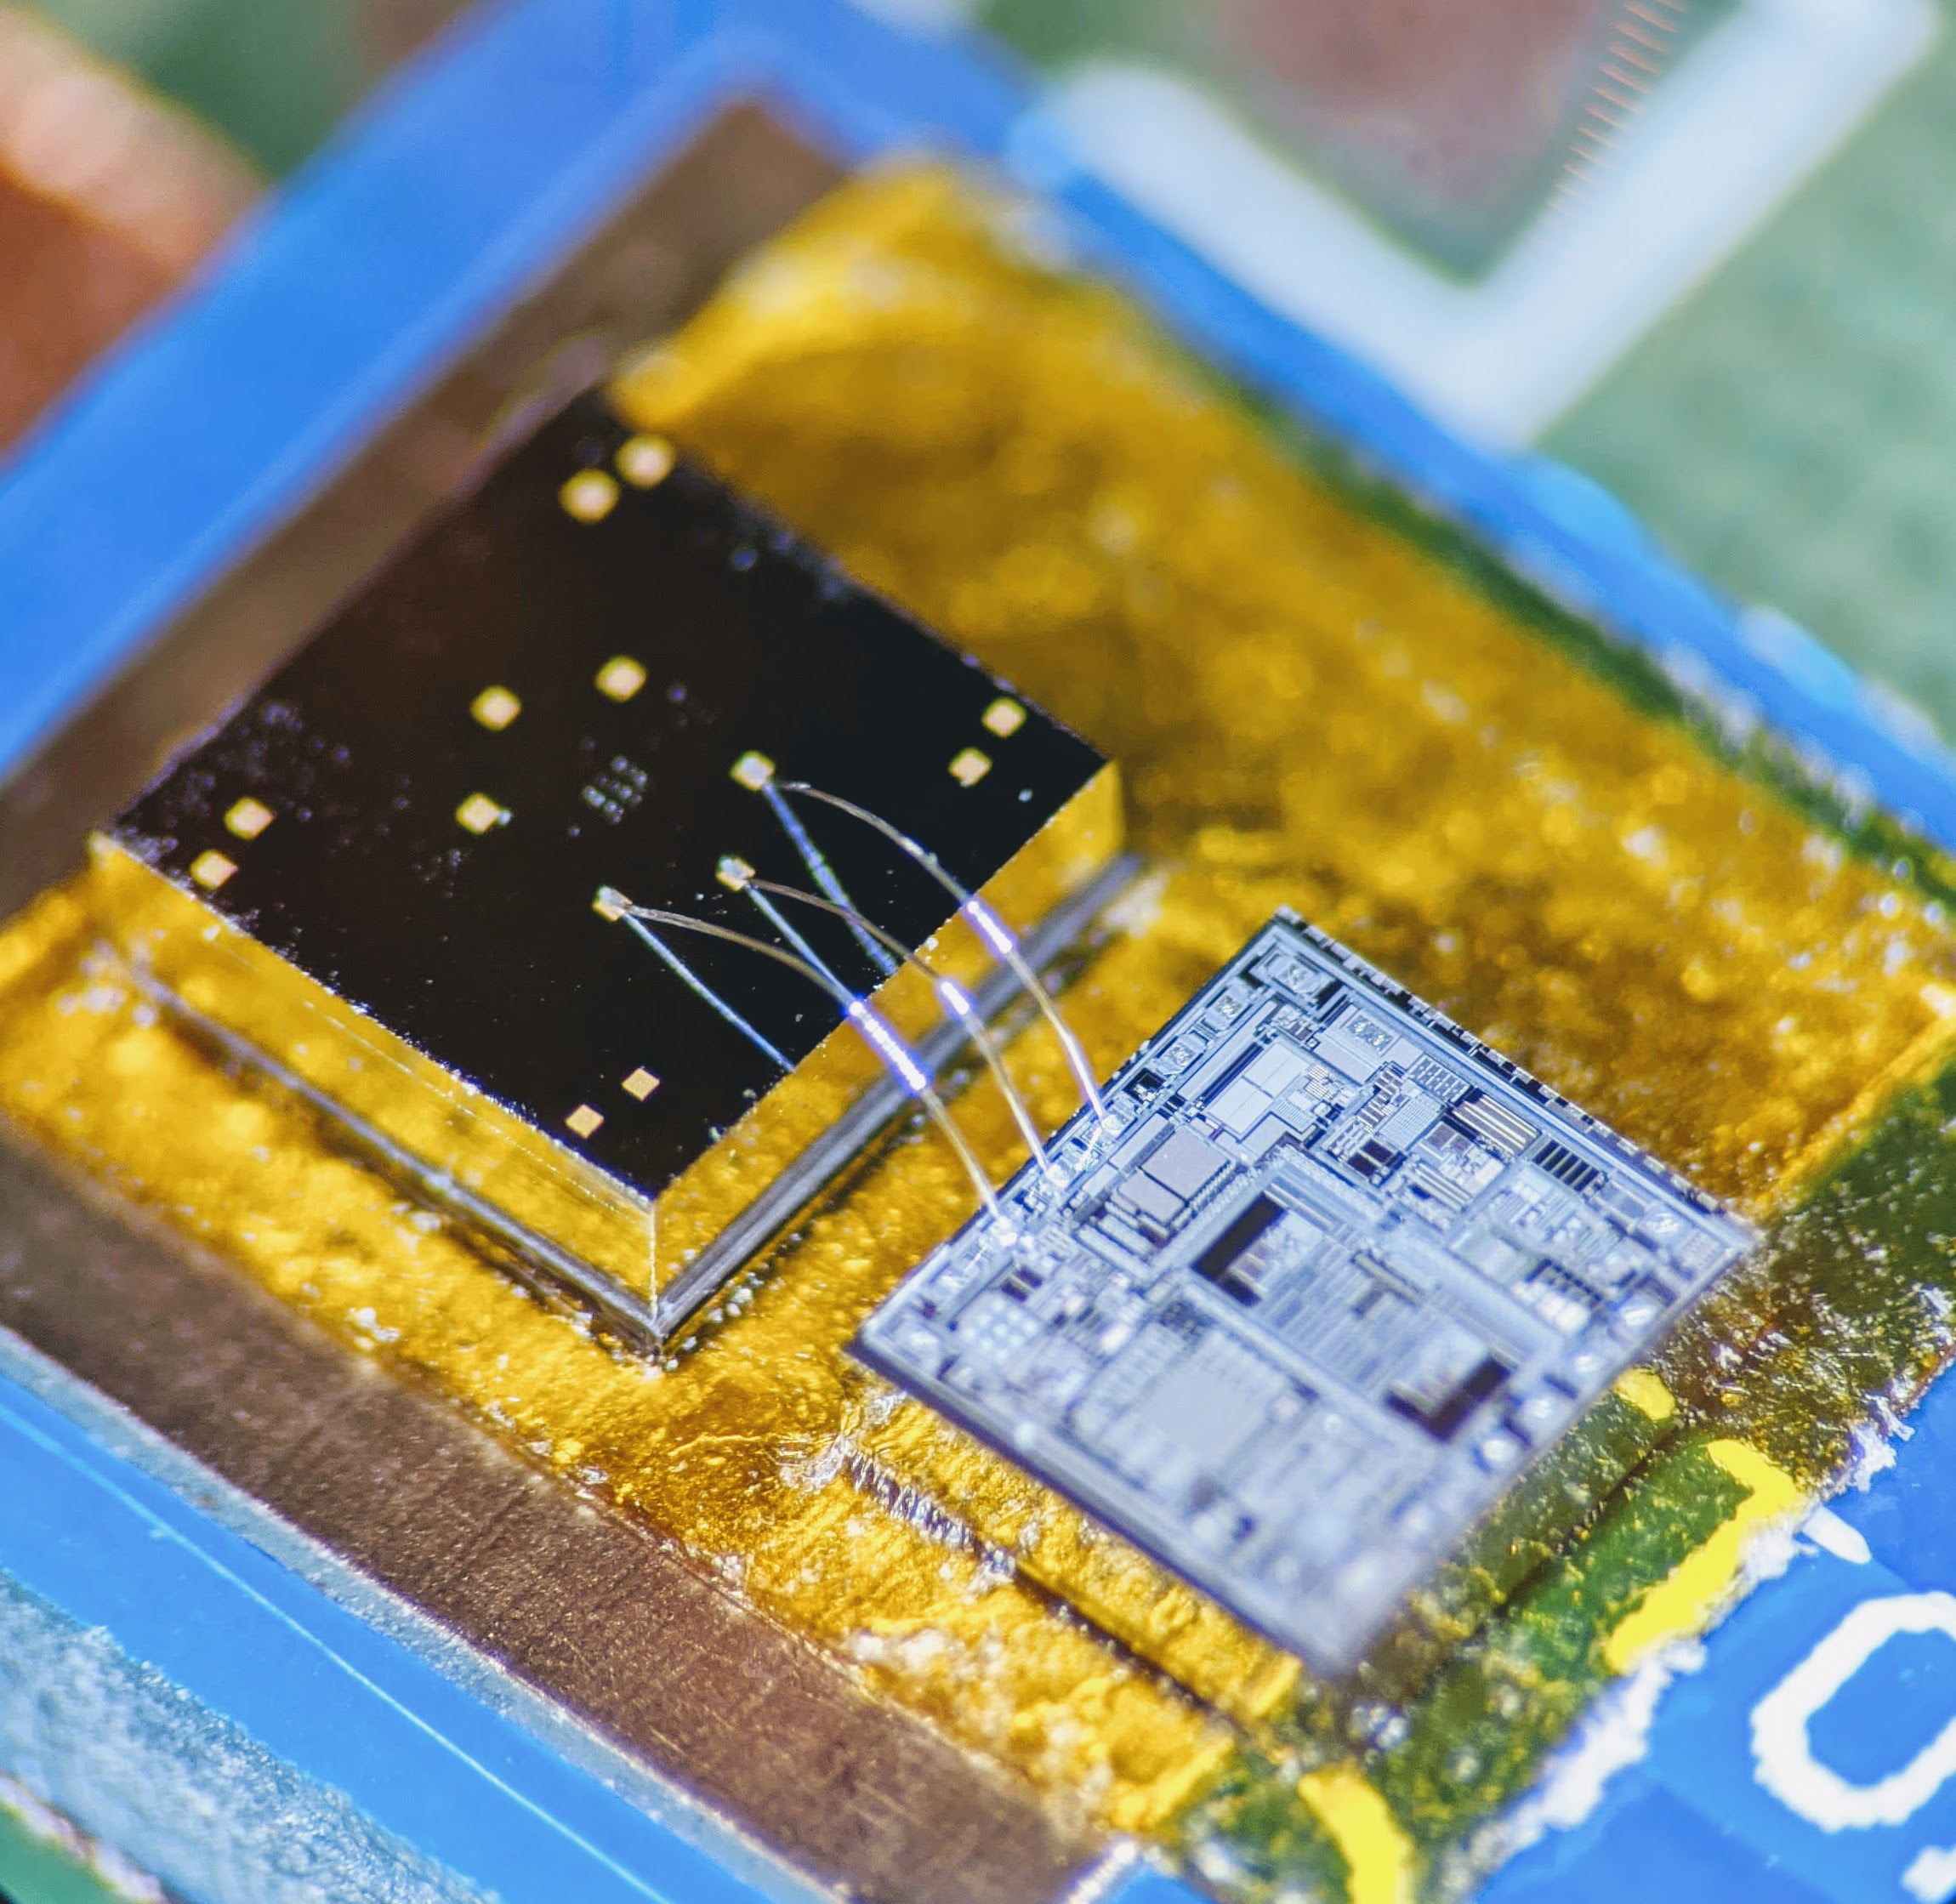 The sensor is a physical chip remarkably attuned to inertia. Next to it, an electronic chip called a signal-conditioning circuit translates the sensor chip’s signals into patterned read-outs. Credit: Georgia Tech / Ayazi lab